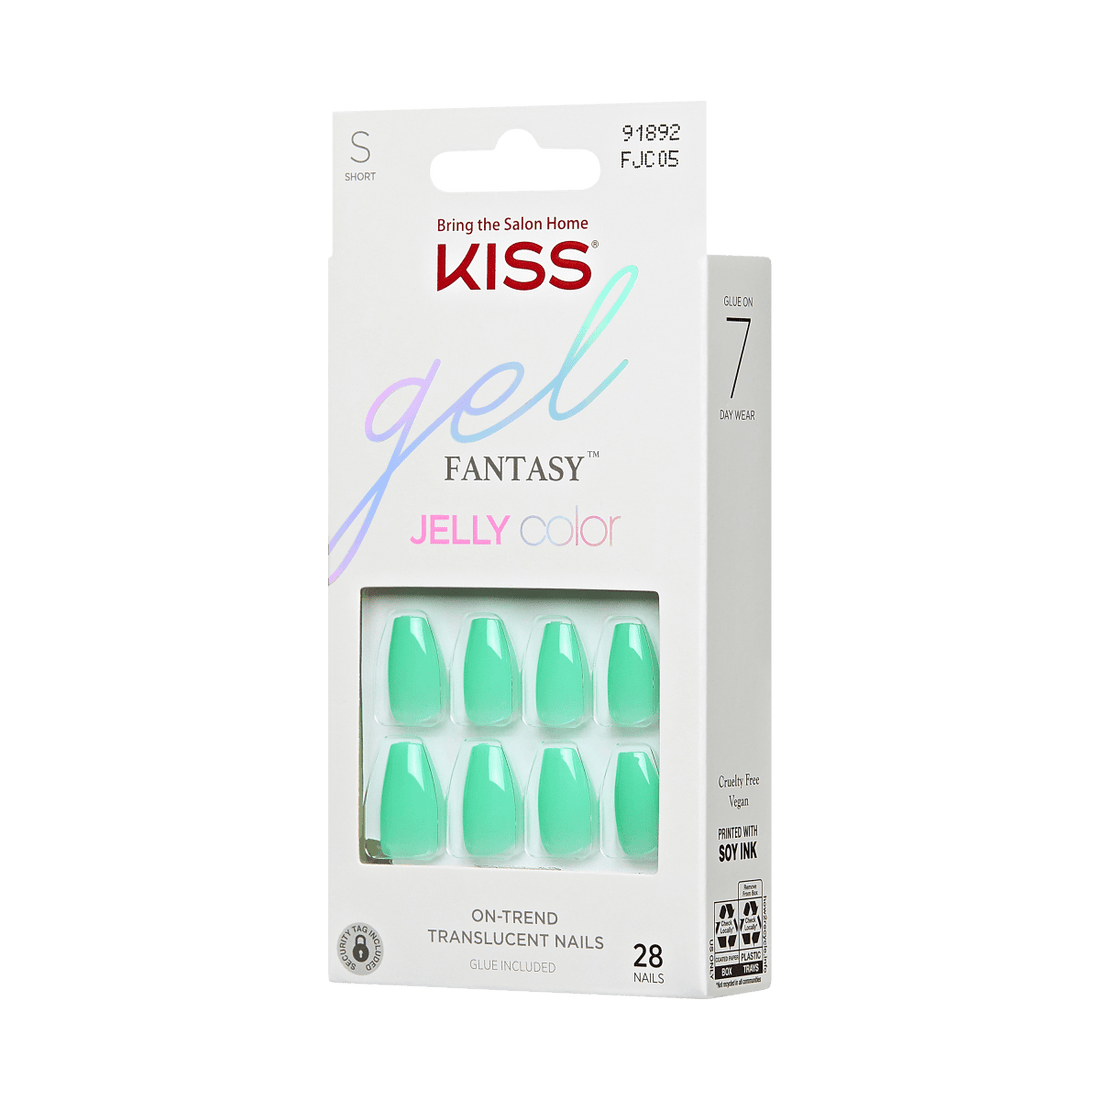 KISS Gel Fantasy, Press-On Nails, Poppin Jelly, Green, Med Coffin, 28ct